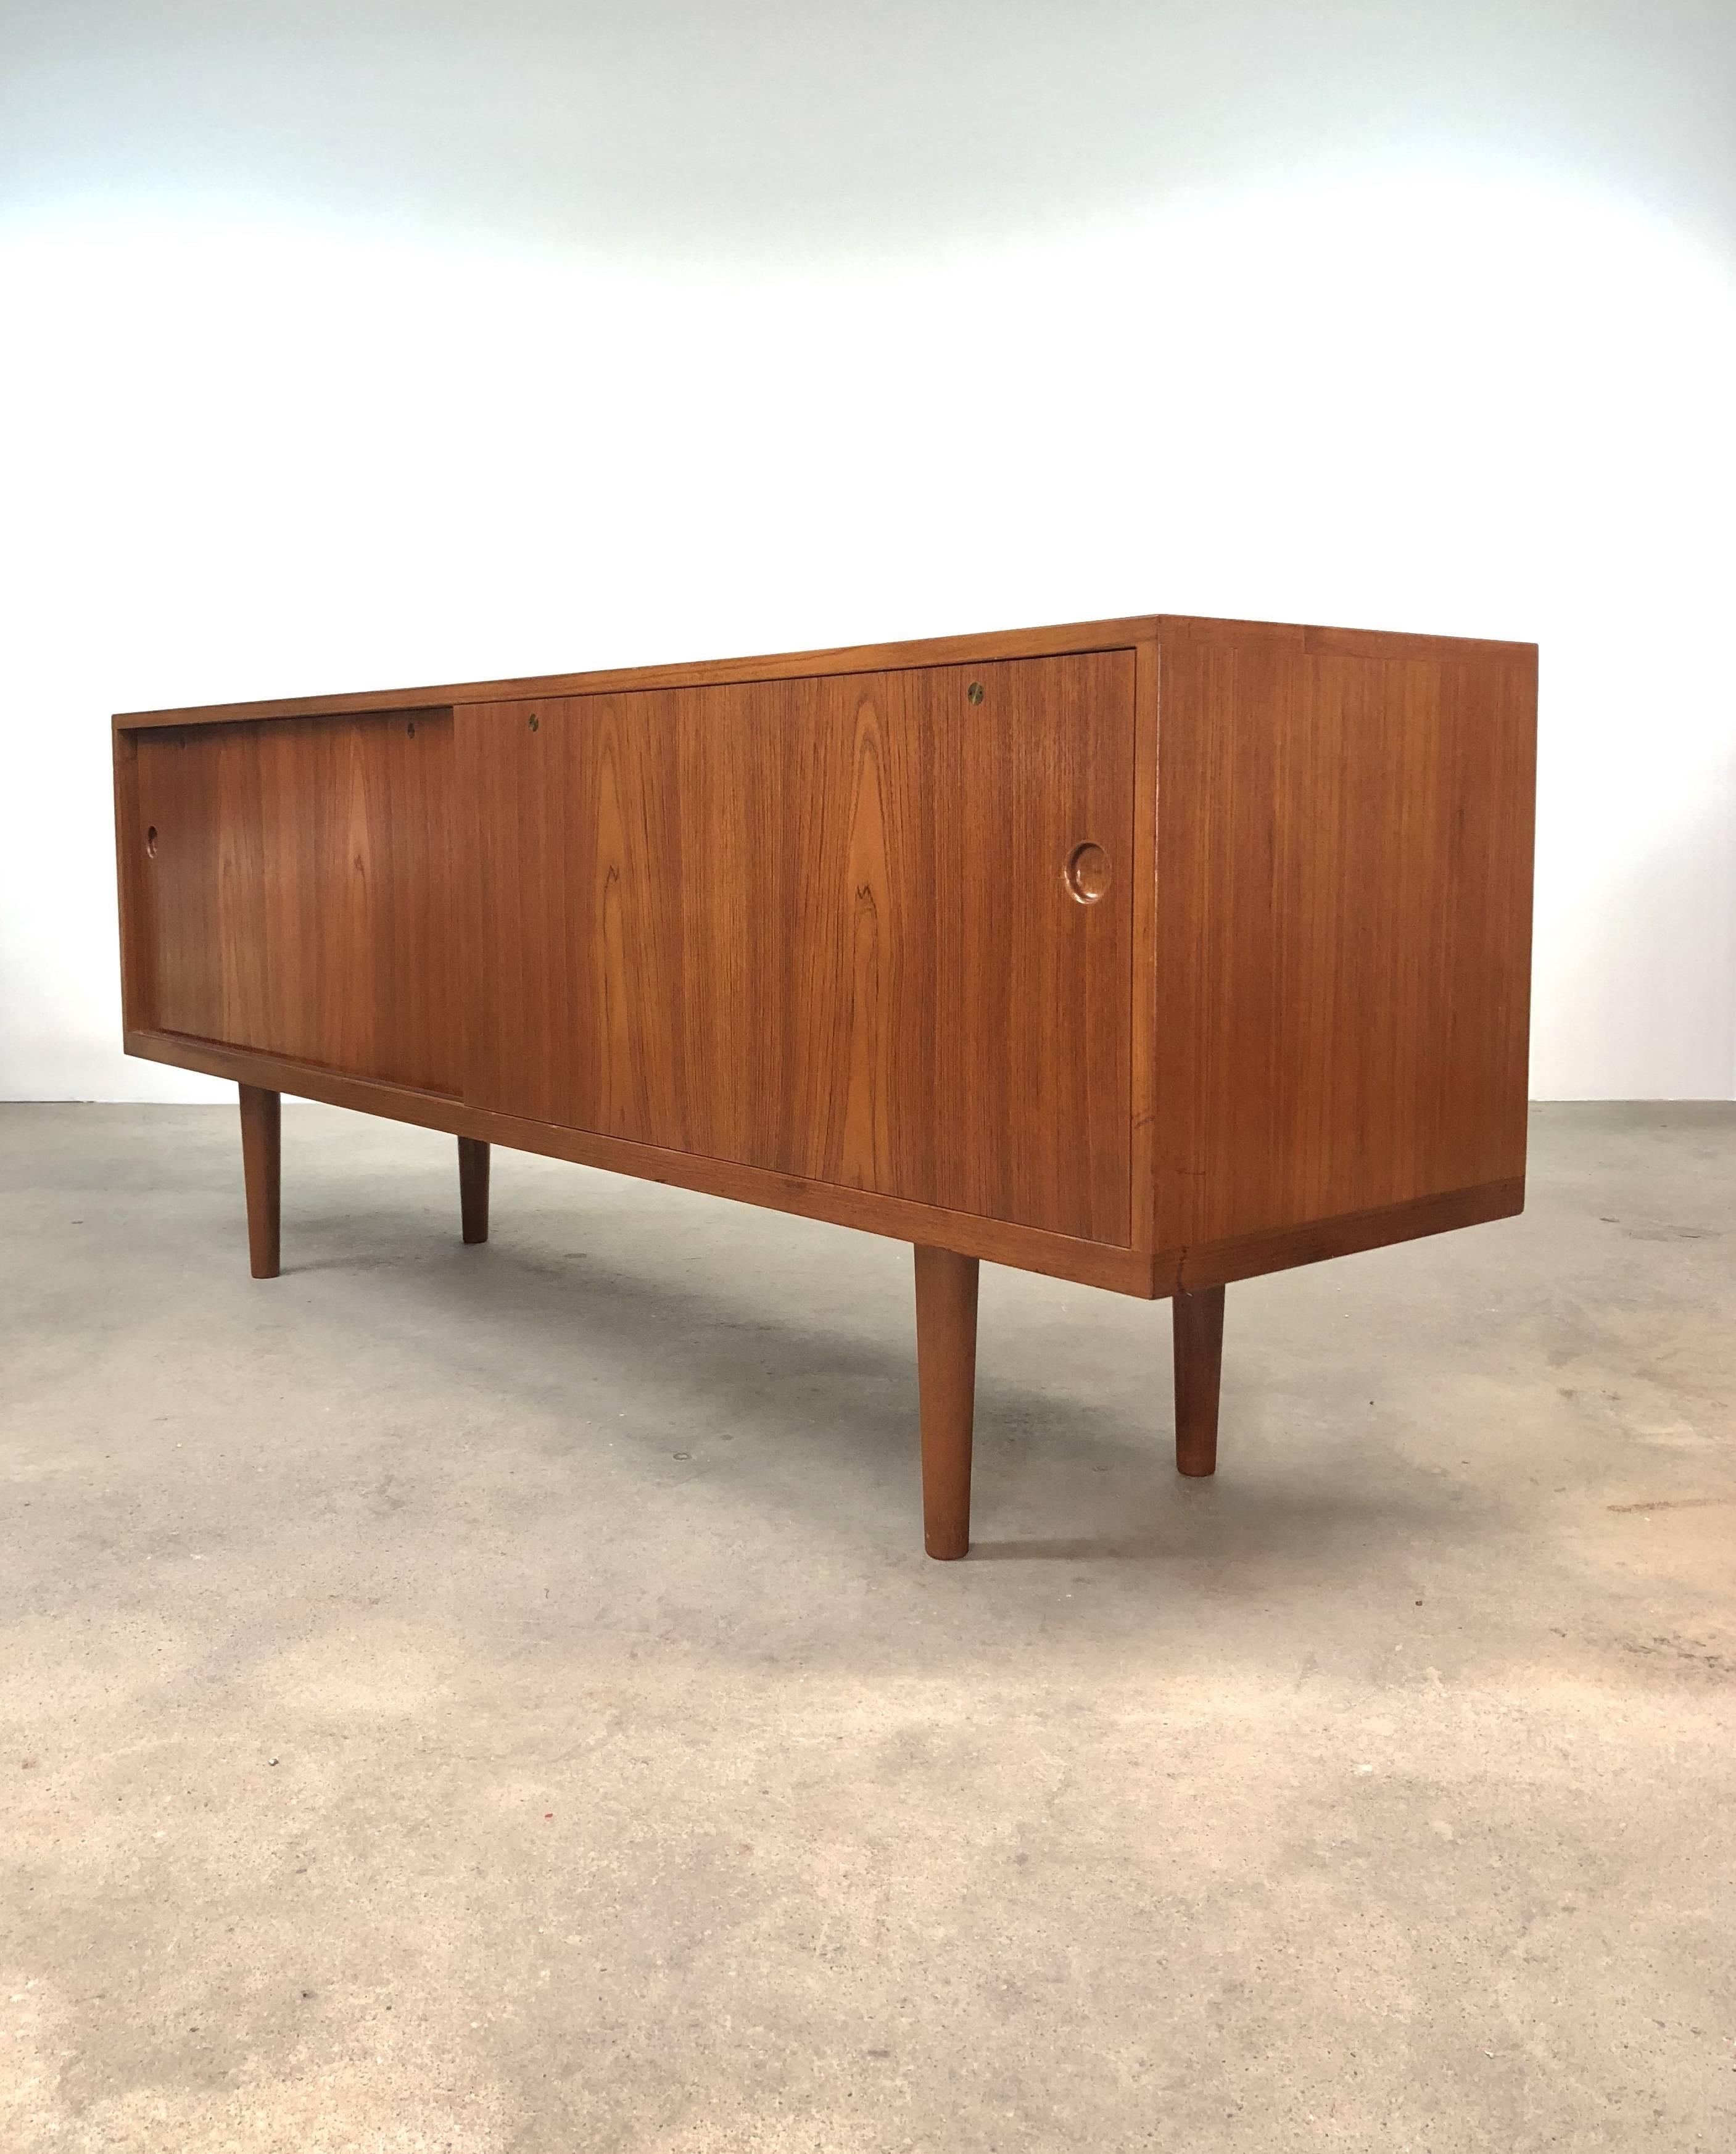 RY-26 Teak Credenza by Hans Wegner In Good Condition For Sale In Providence, RI